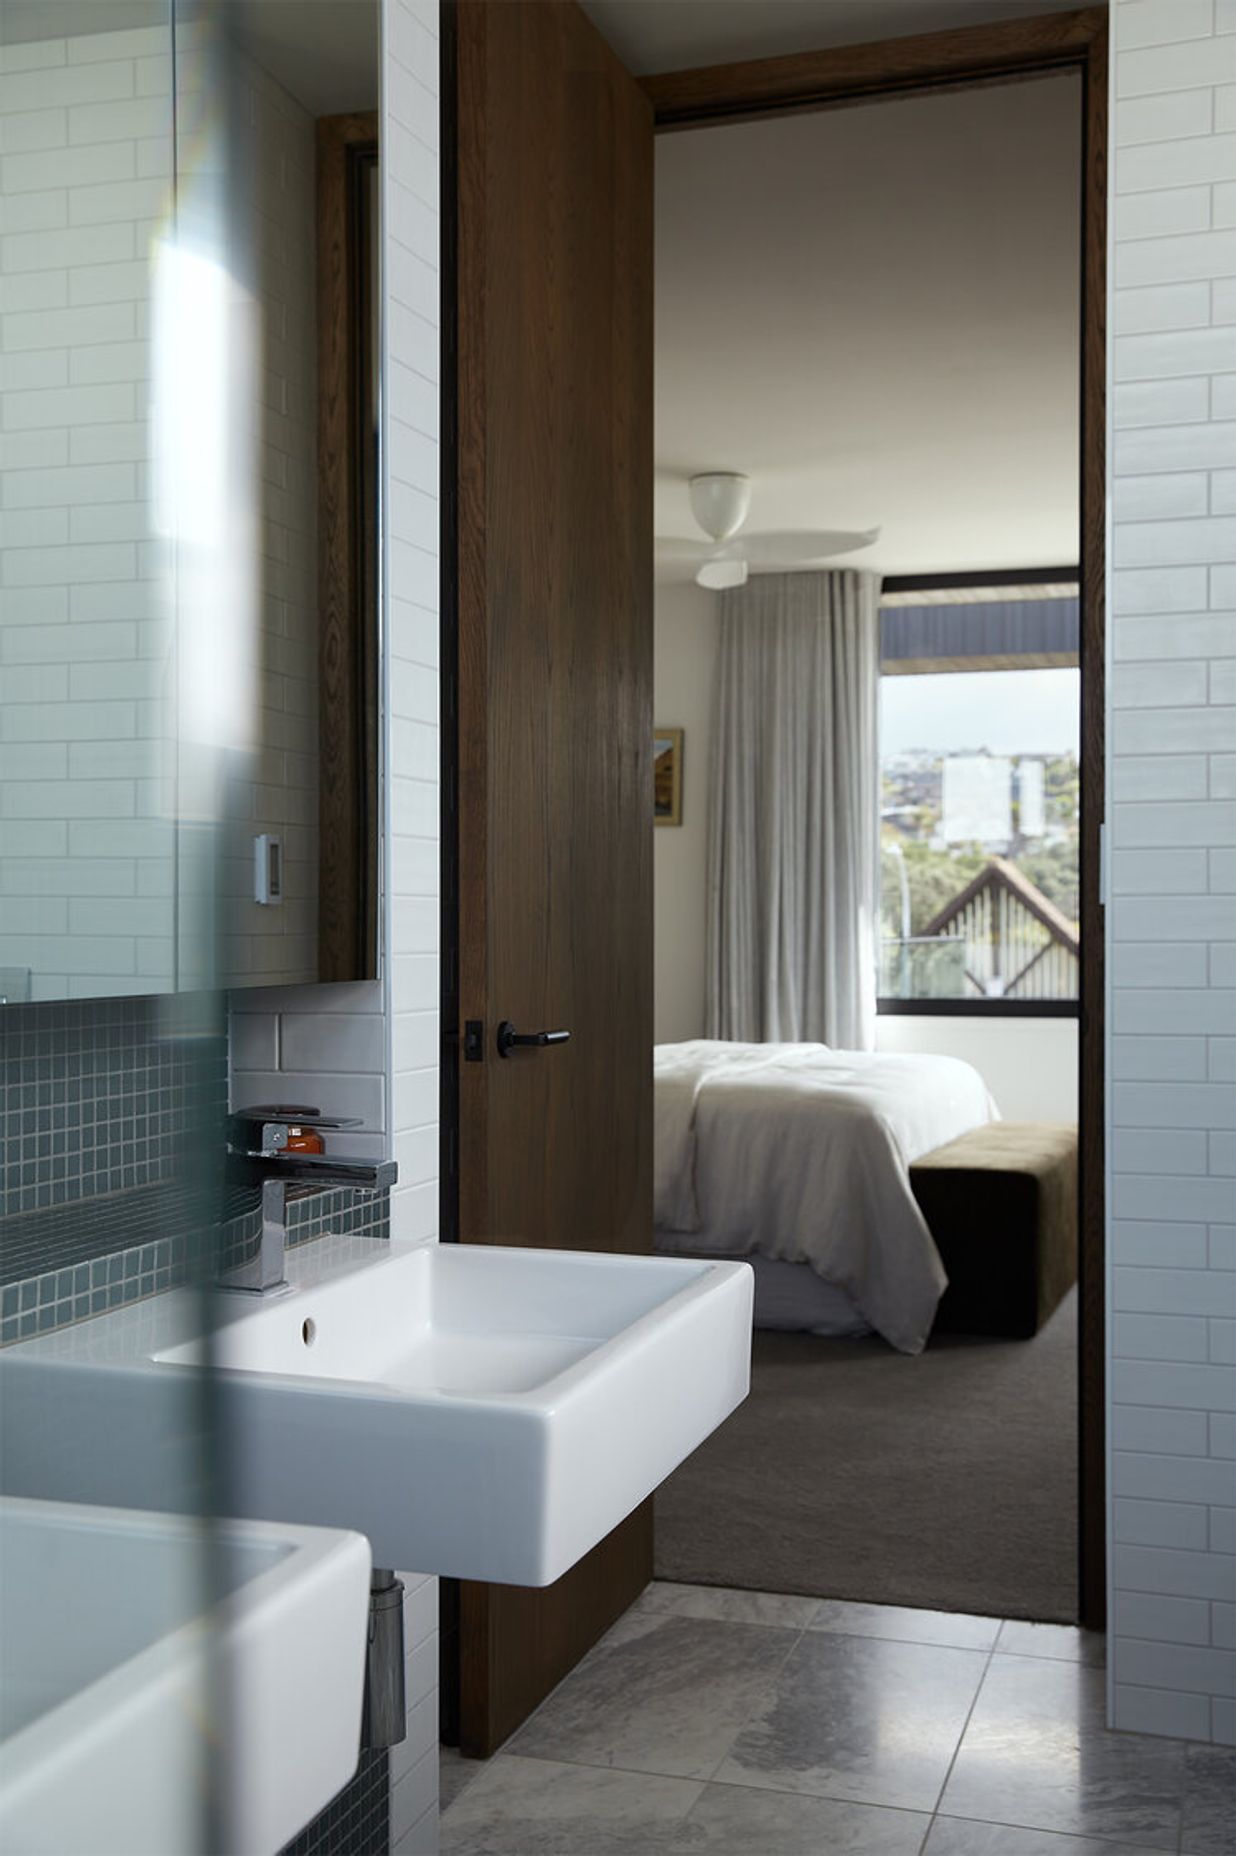 The master en suite features classic marble floor tiles and wall tiles in ocean-hues.